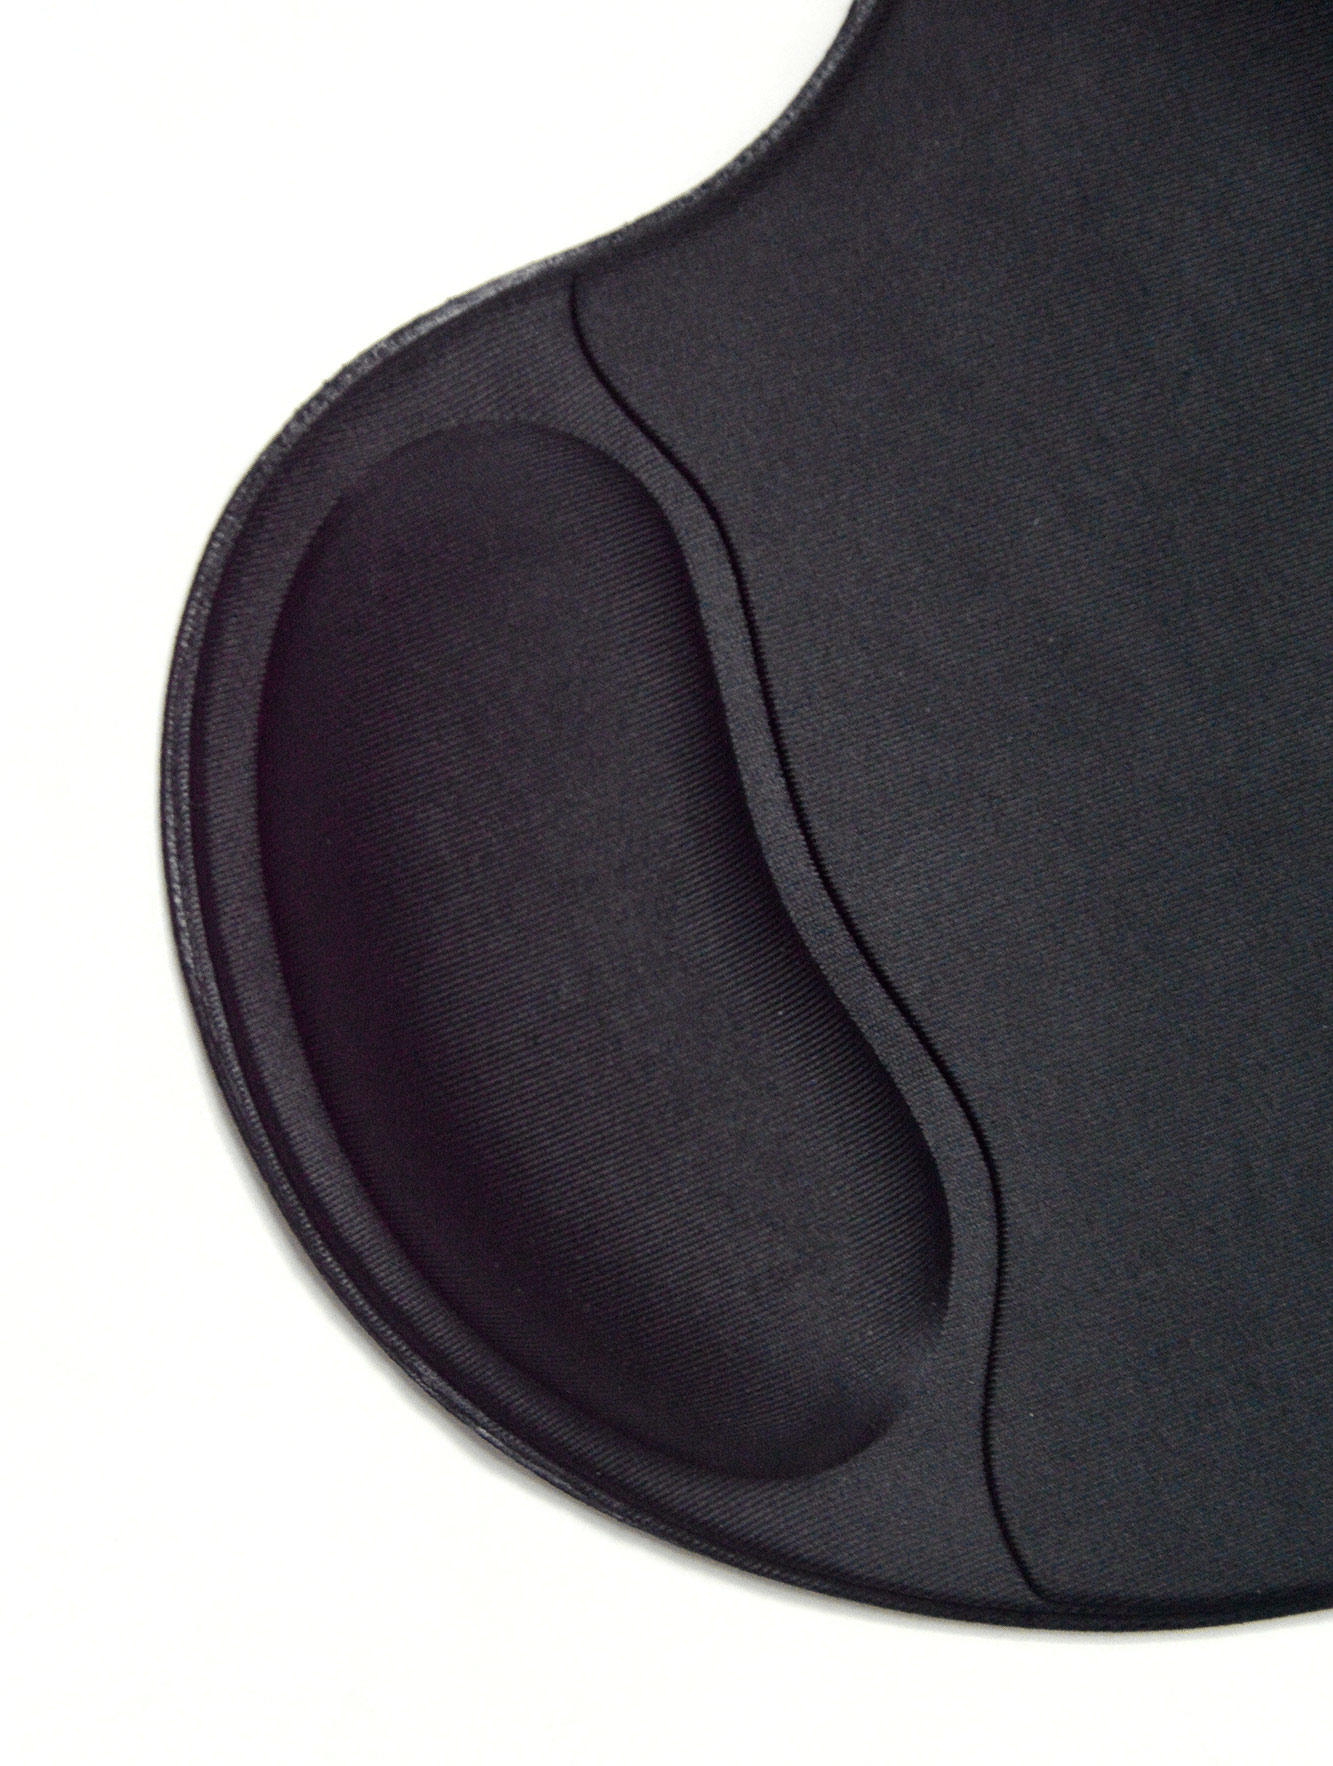 New product - Foam wrist rest mouse pad with anti-slip SBR bottom comfortable foam hand pillow mouse pad